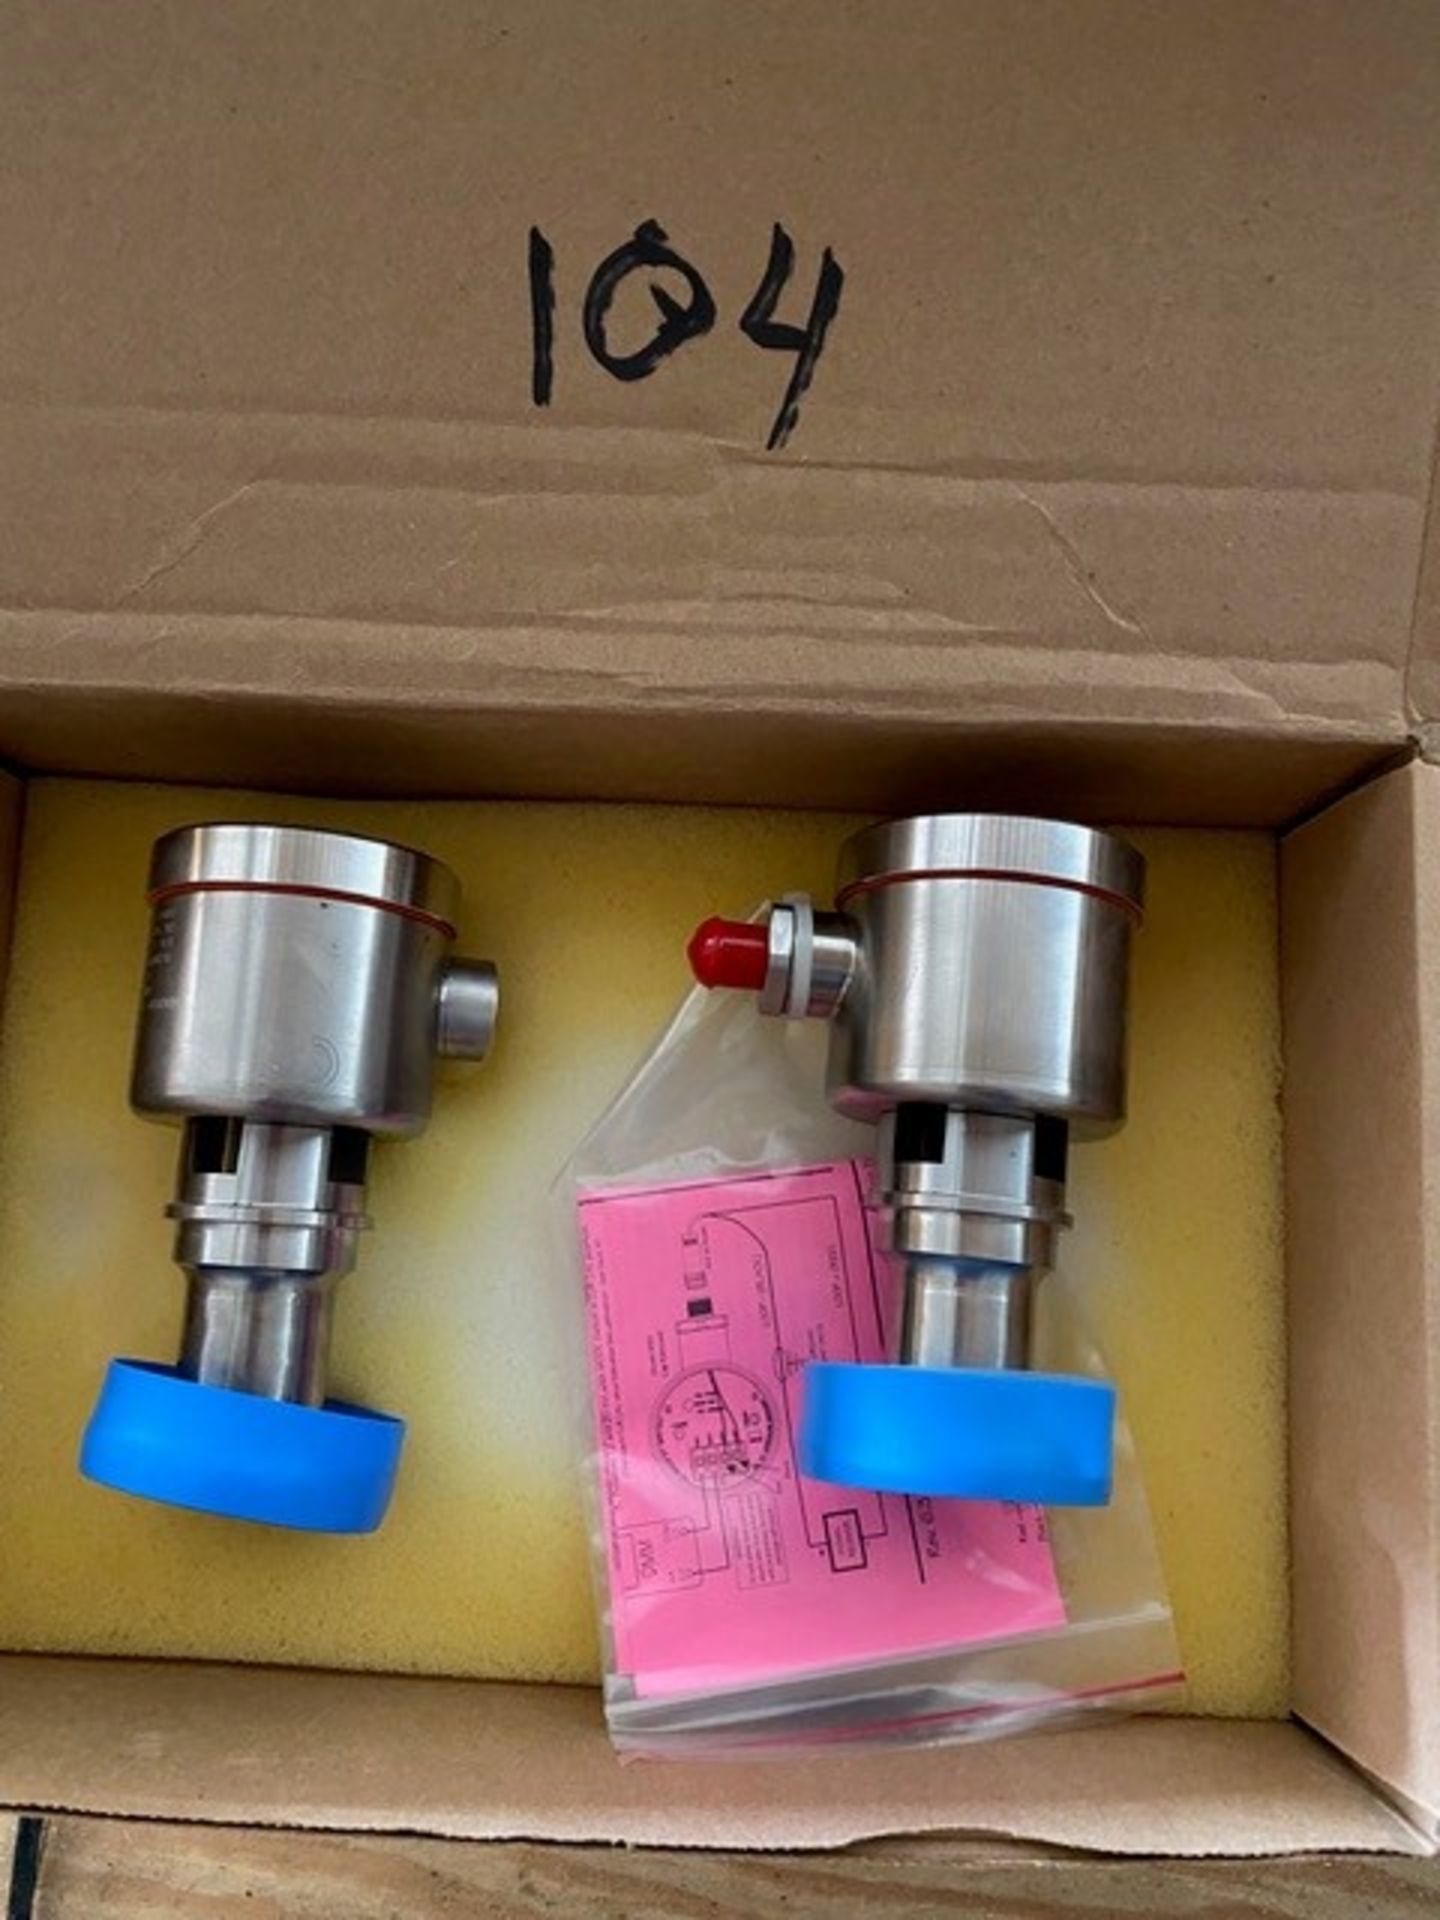 New Anderson level transmitter with 2" tri clamp fittings Rigging: $20 Rigging Fee: $20 Location: